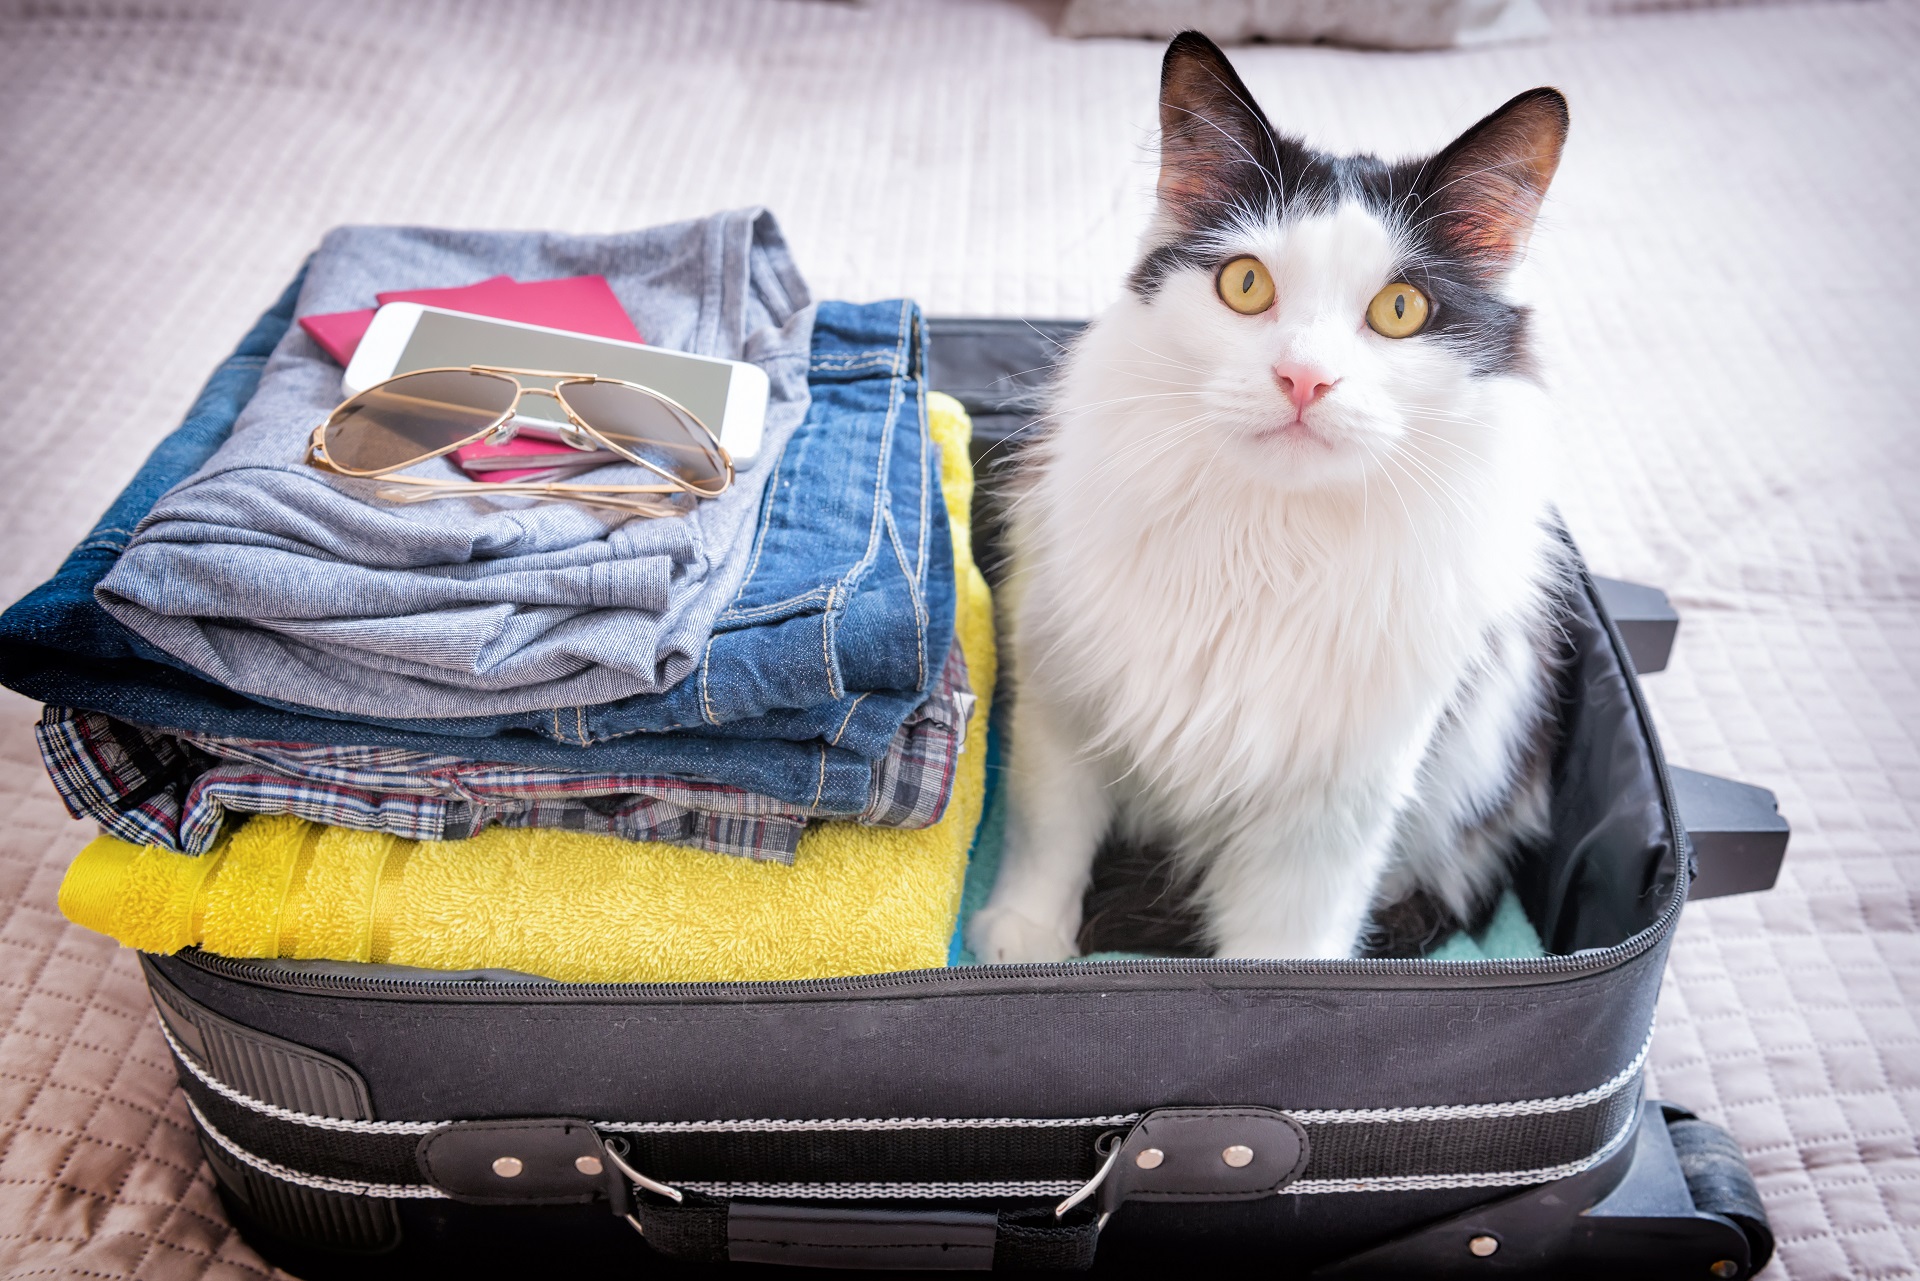 A Guide To Vacation With Your Cat